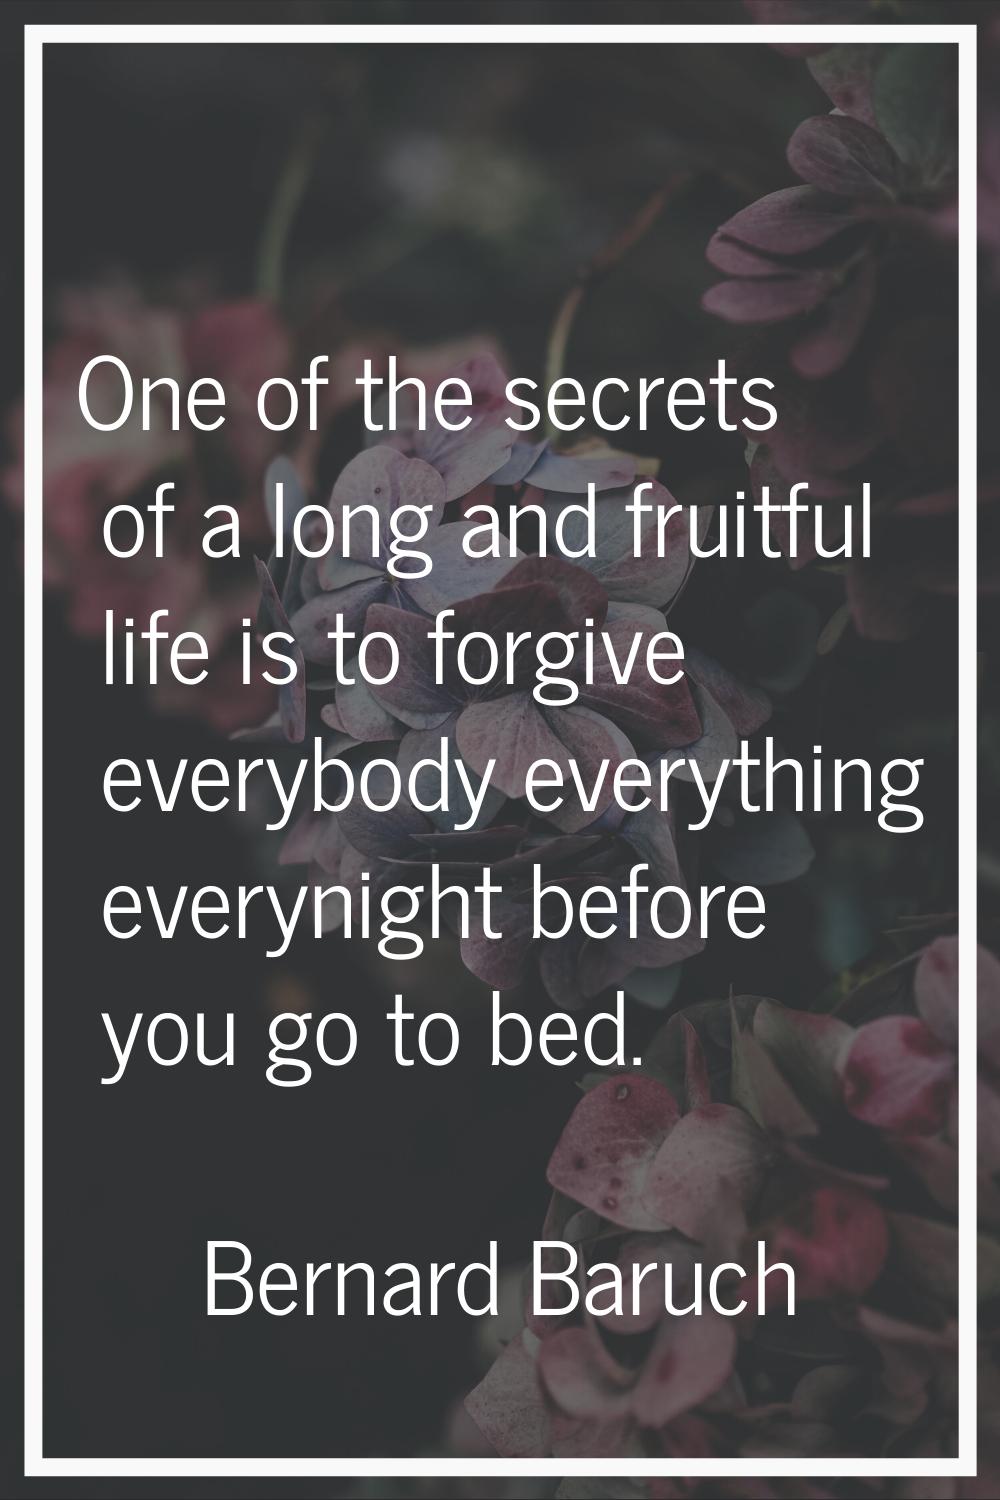 One of the secrets of a long and fruitful life is to forgive everybody everything everynight before